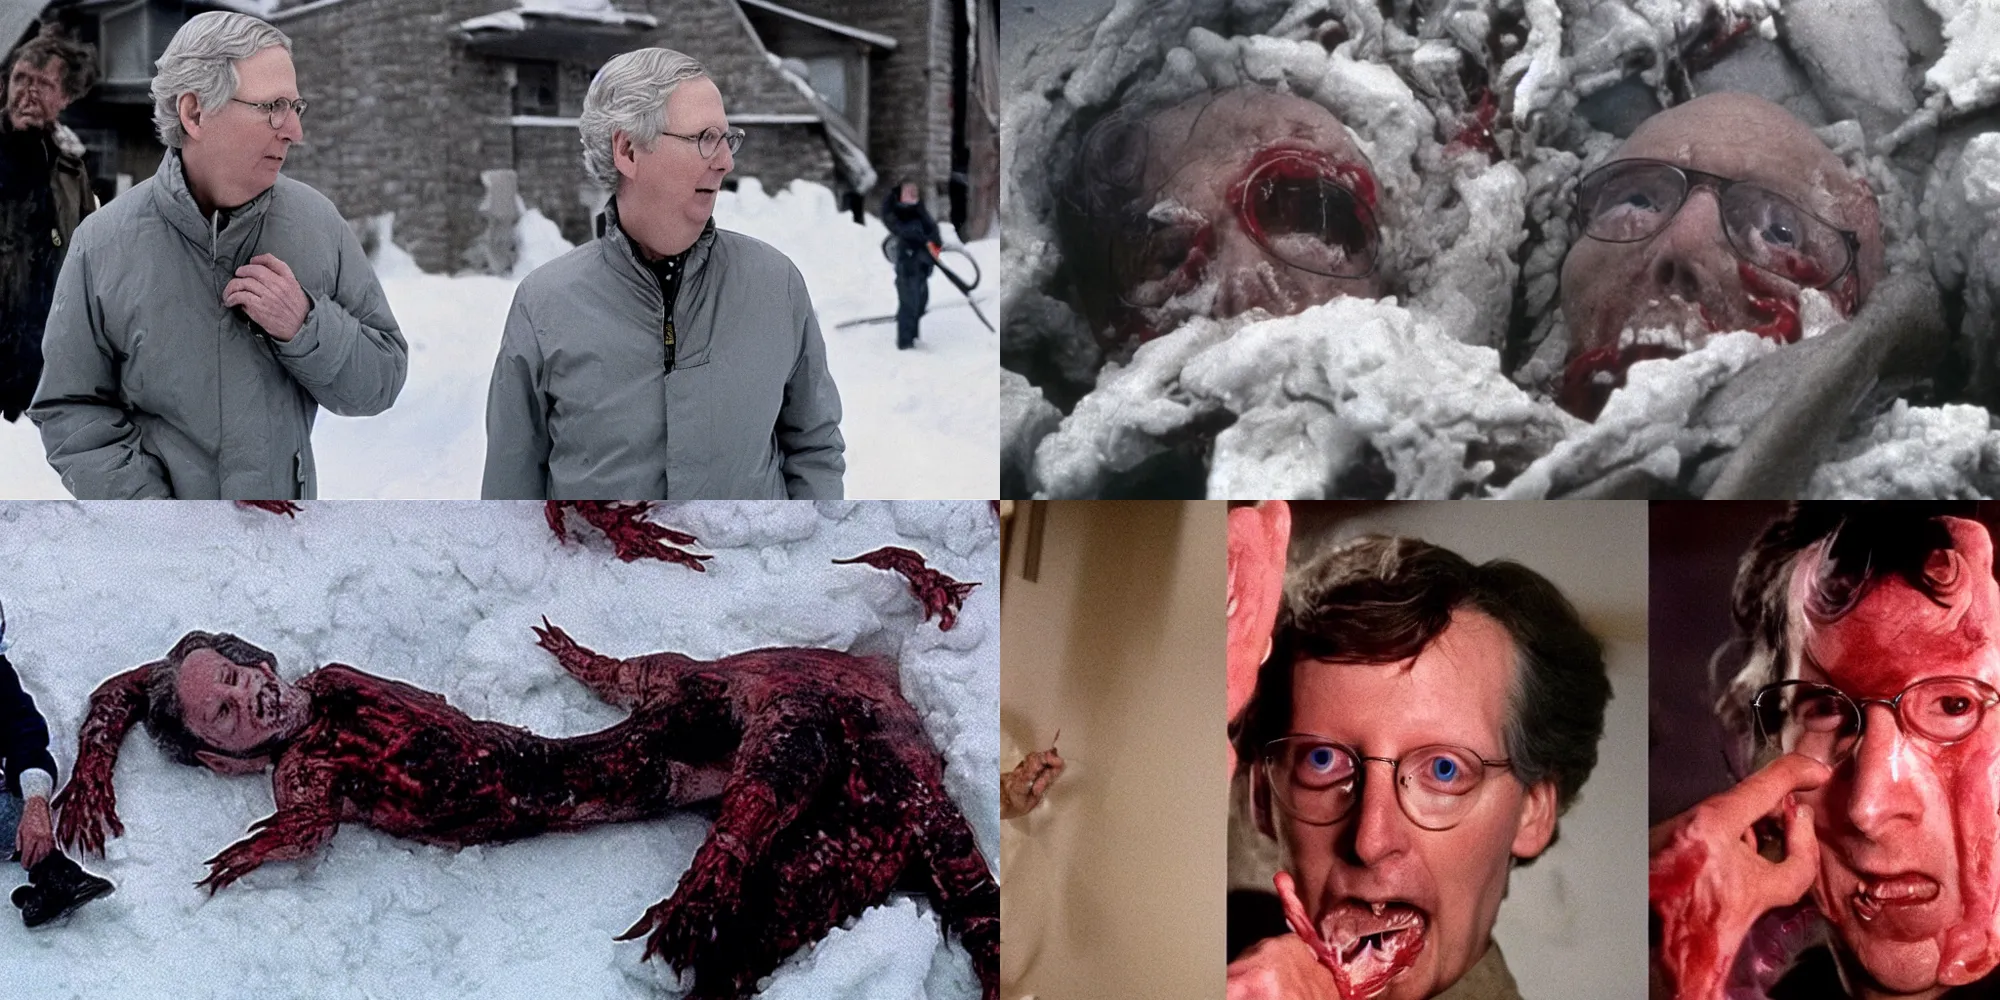 Prompt: mitch mcconnell next to ted cruz body horror in the thing ( 1 9 8 2 ) directed by john carpenter, limb mutations, swollen veins, red flesh strings, antarctica, snow, flamethrower, cinestill 8 0 0 t, 1 9 8 0 s movie still, film grain